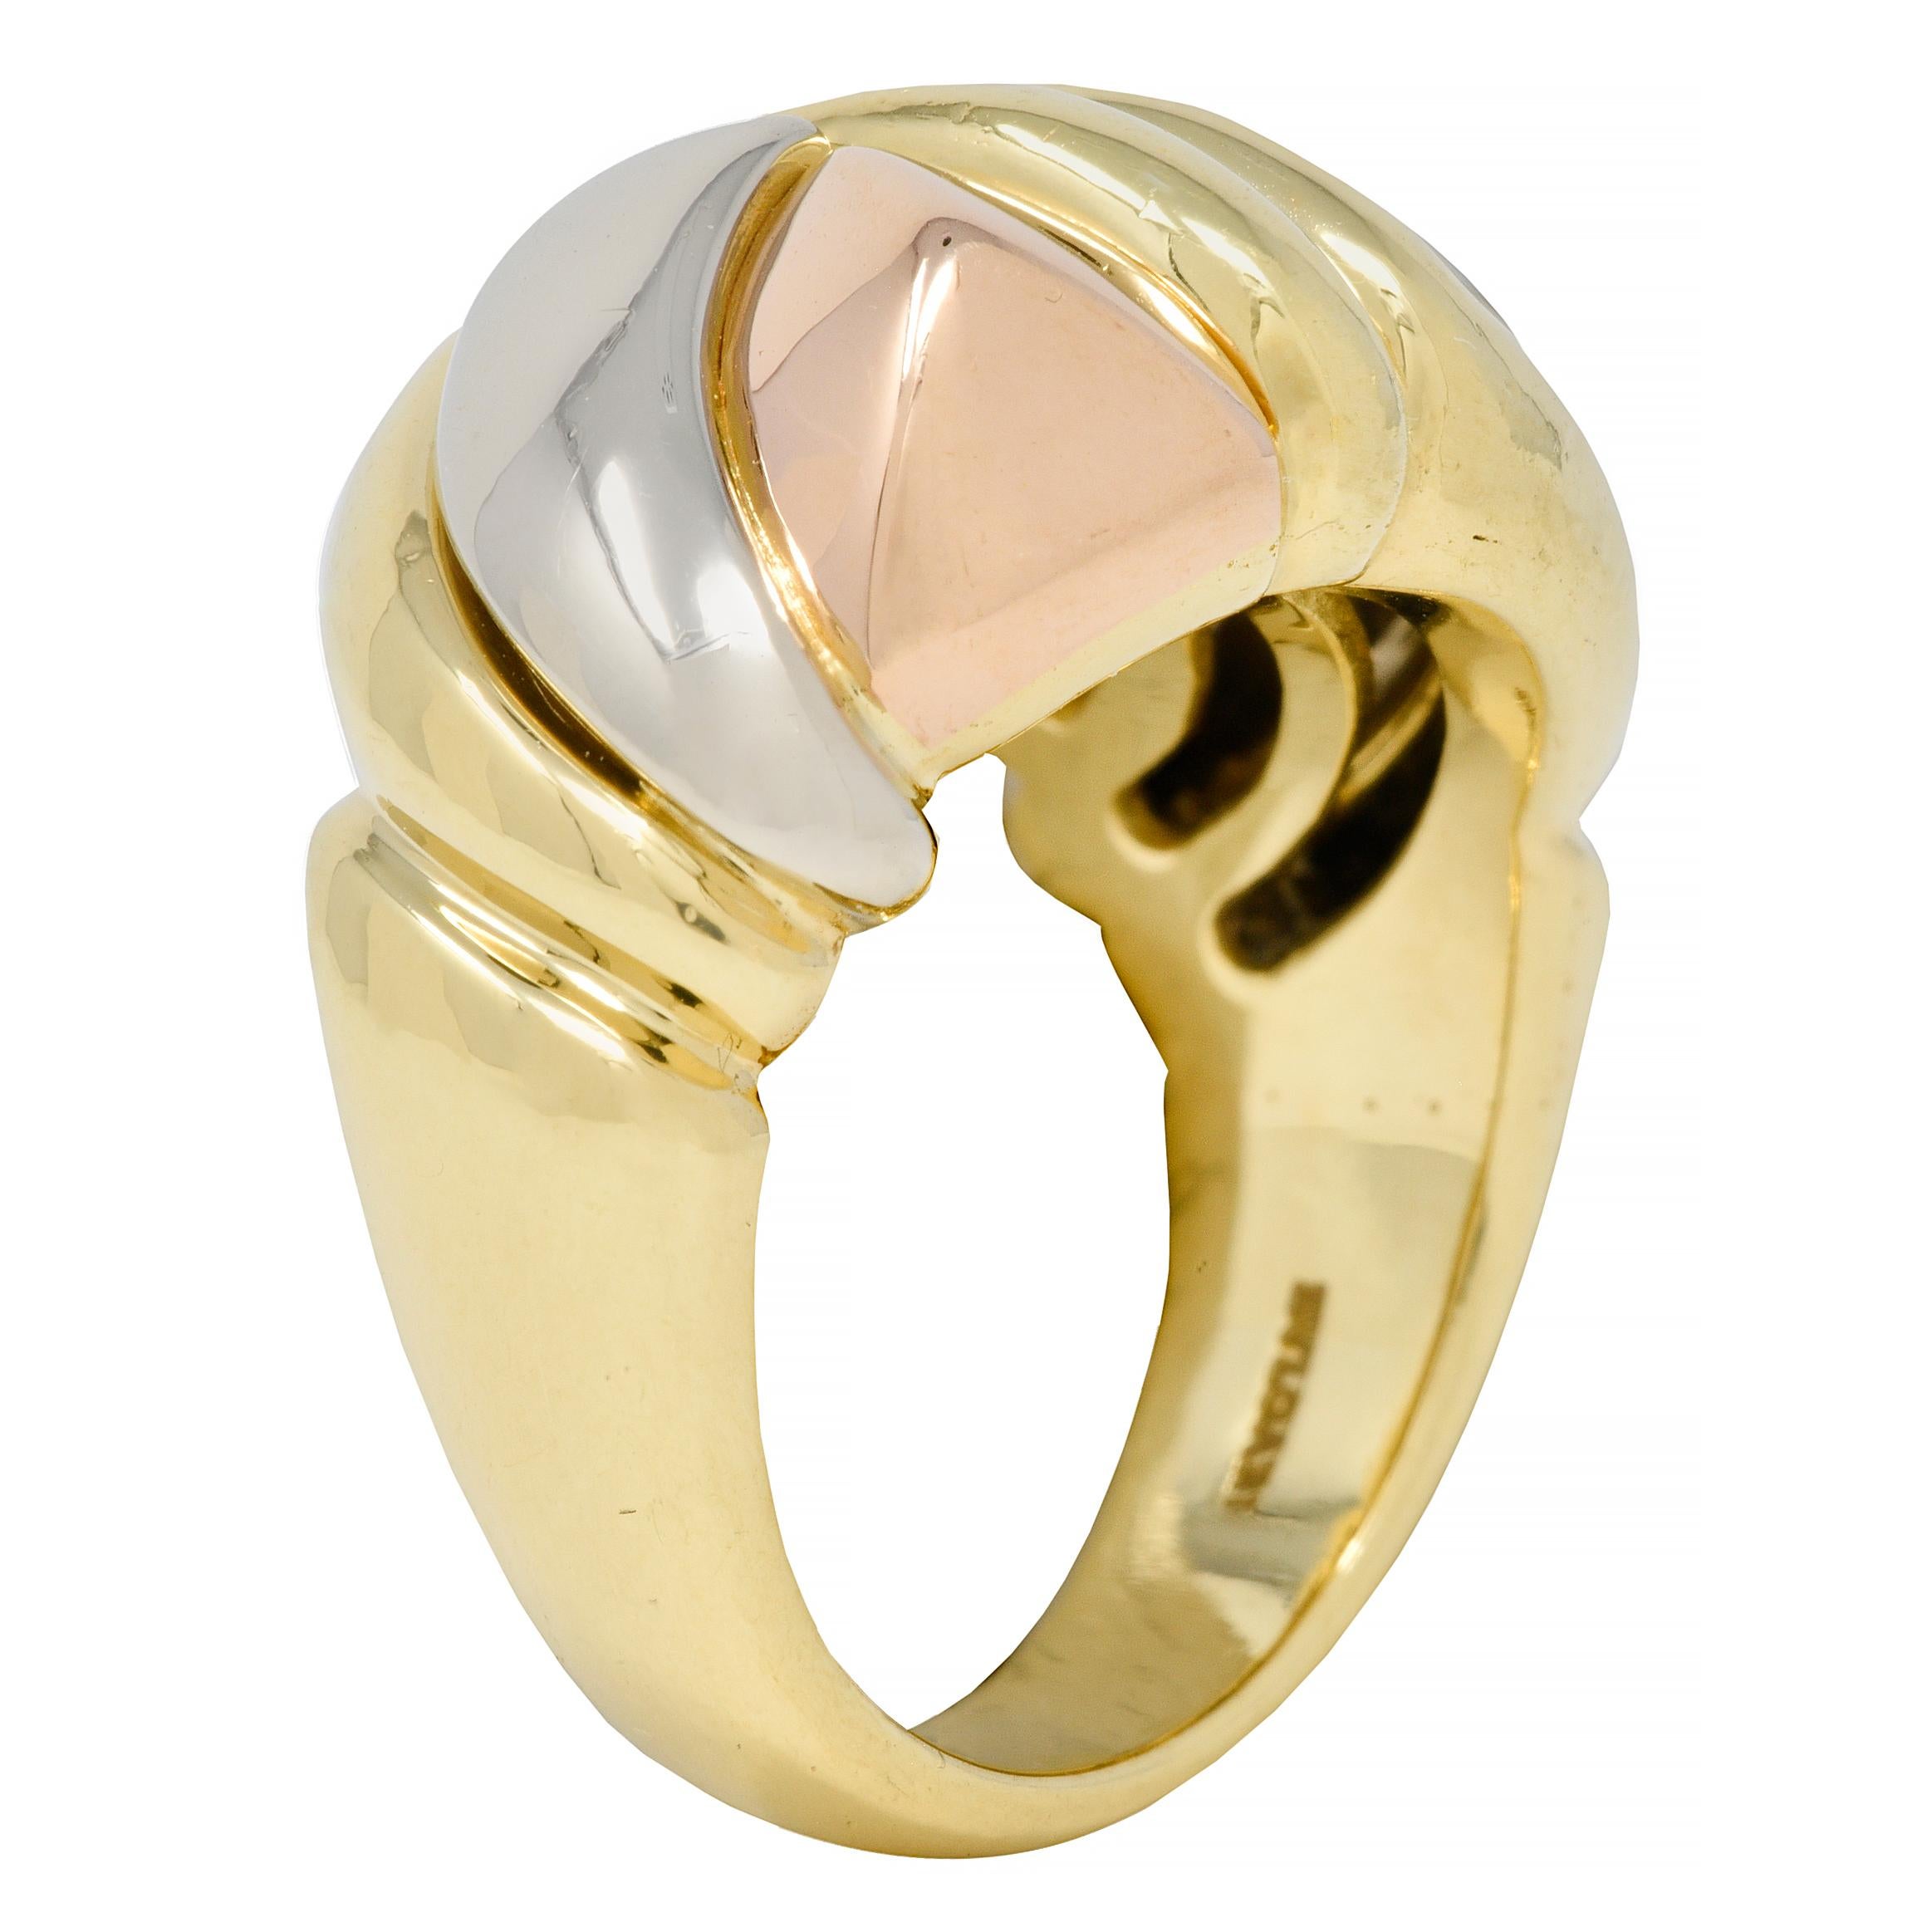 Designed as a domed form comprised of segmented triangular forms 
Rose gold form is faceted and white gold form is curved
Bisected by a fluted gold twist motif surround 
With high polish finish
Stamped with Italian assay marks for 18 karat